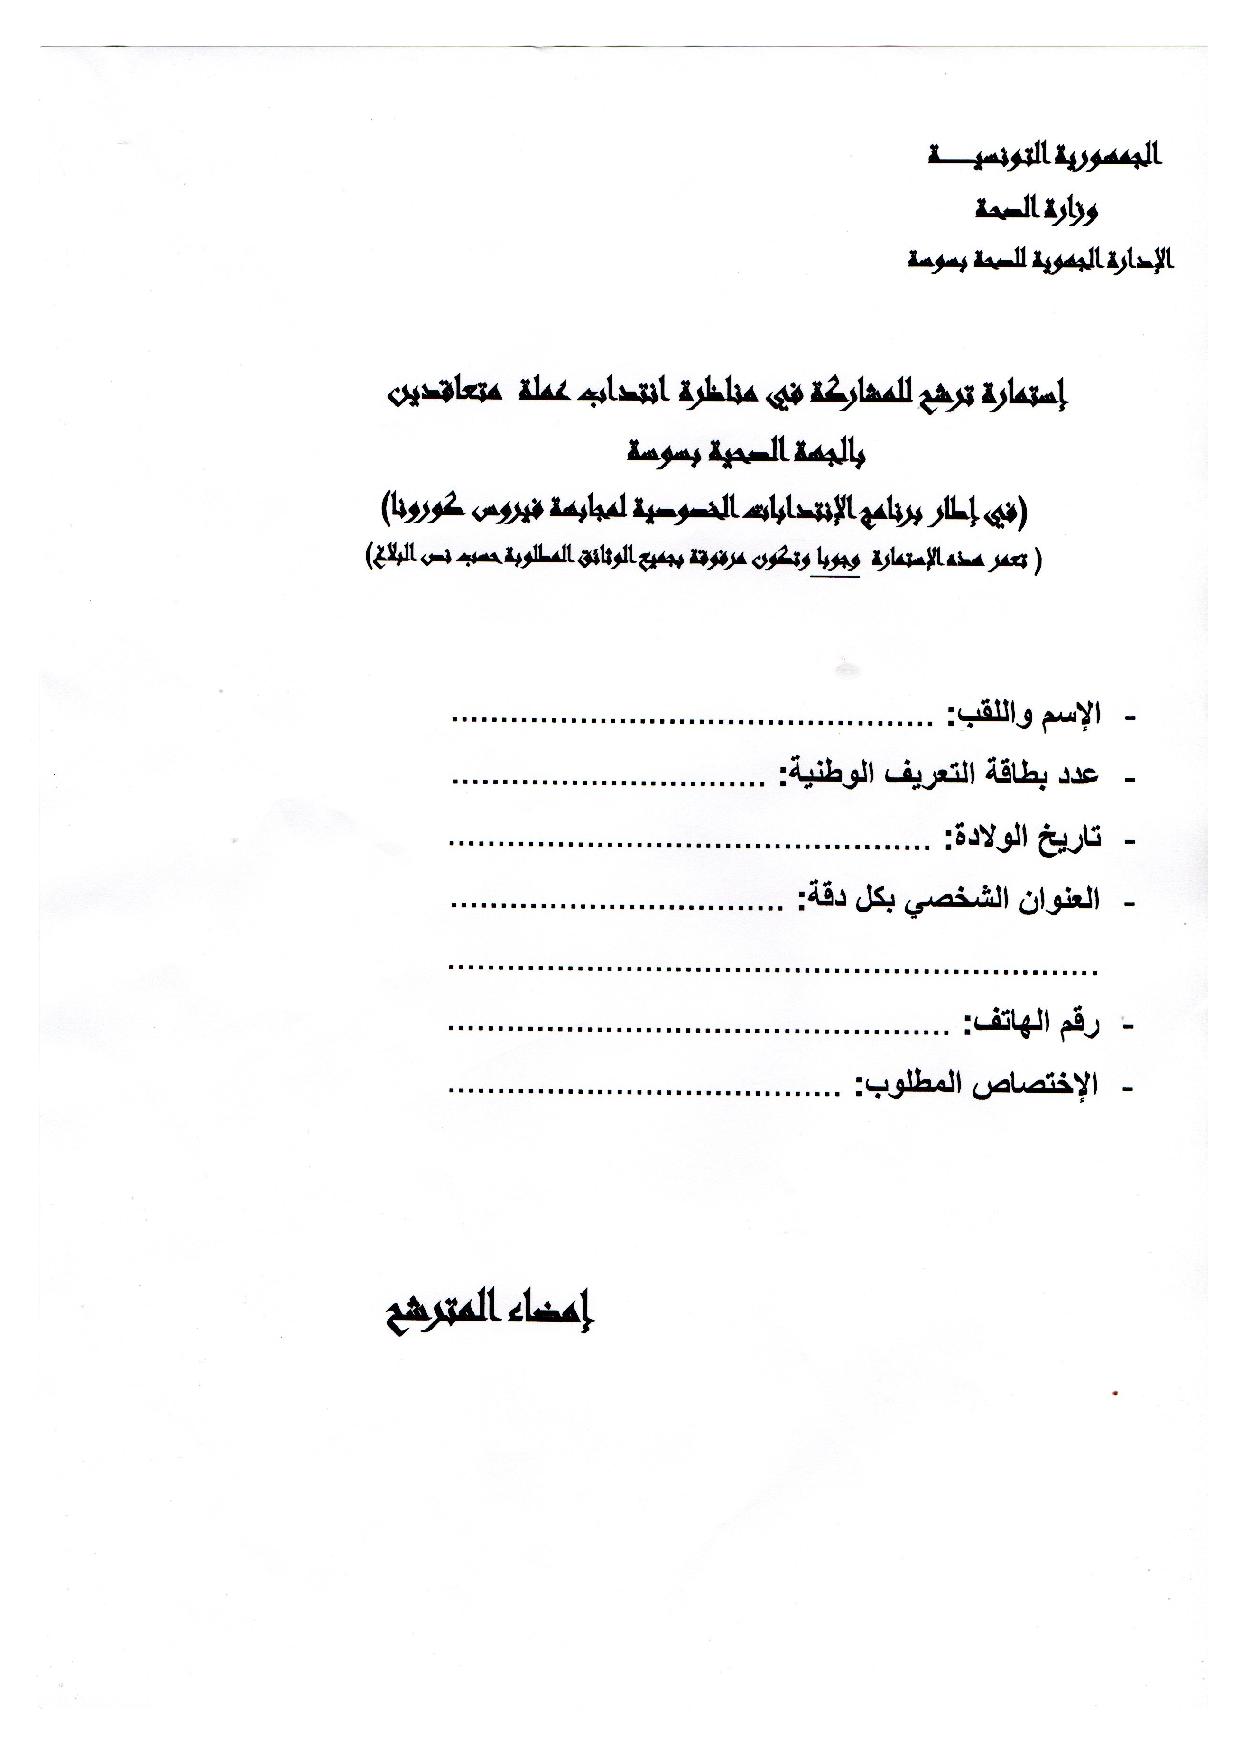 Concours_sousse_2021-page-005.jpg